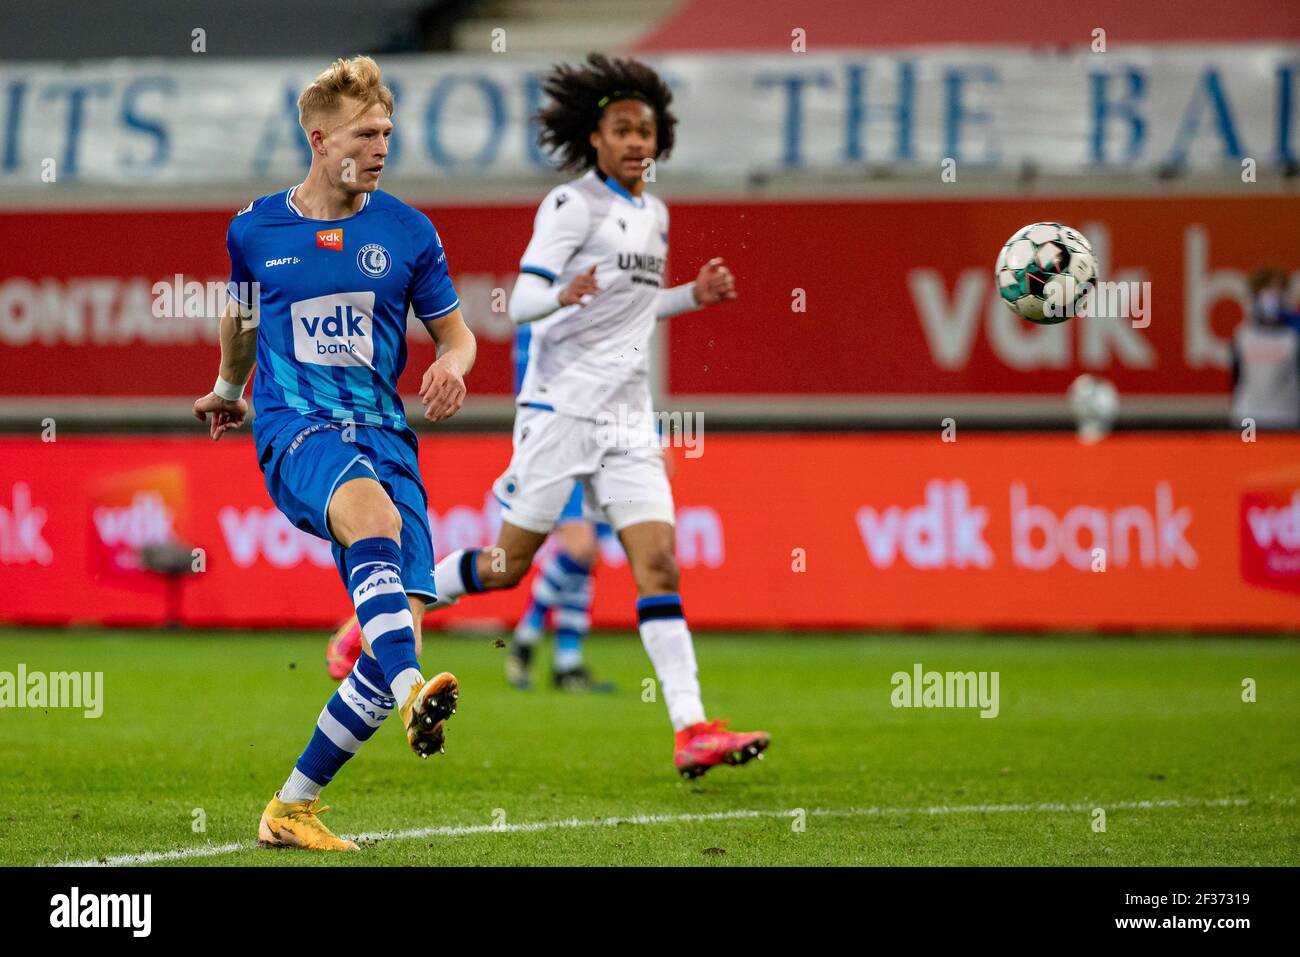 Gent's Andreas Hanche Olsen pictured in action during a soccer match between Club Brugge KV and KAA Gent, Monday 15 March 2021 in Brugge, a postponed Stock Photo